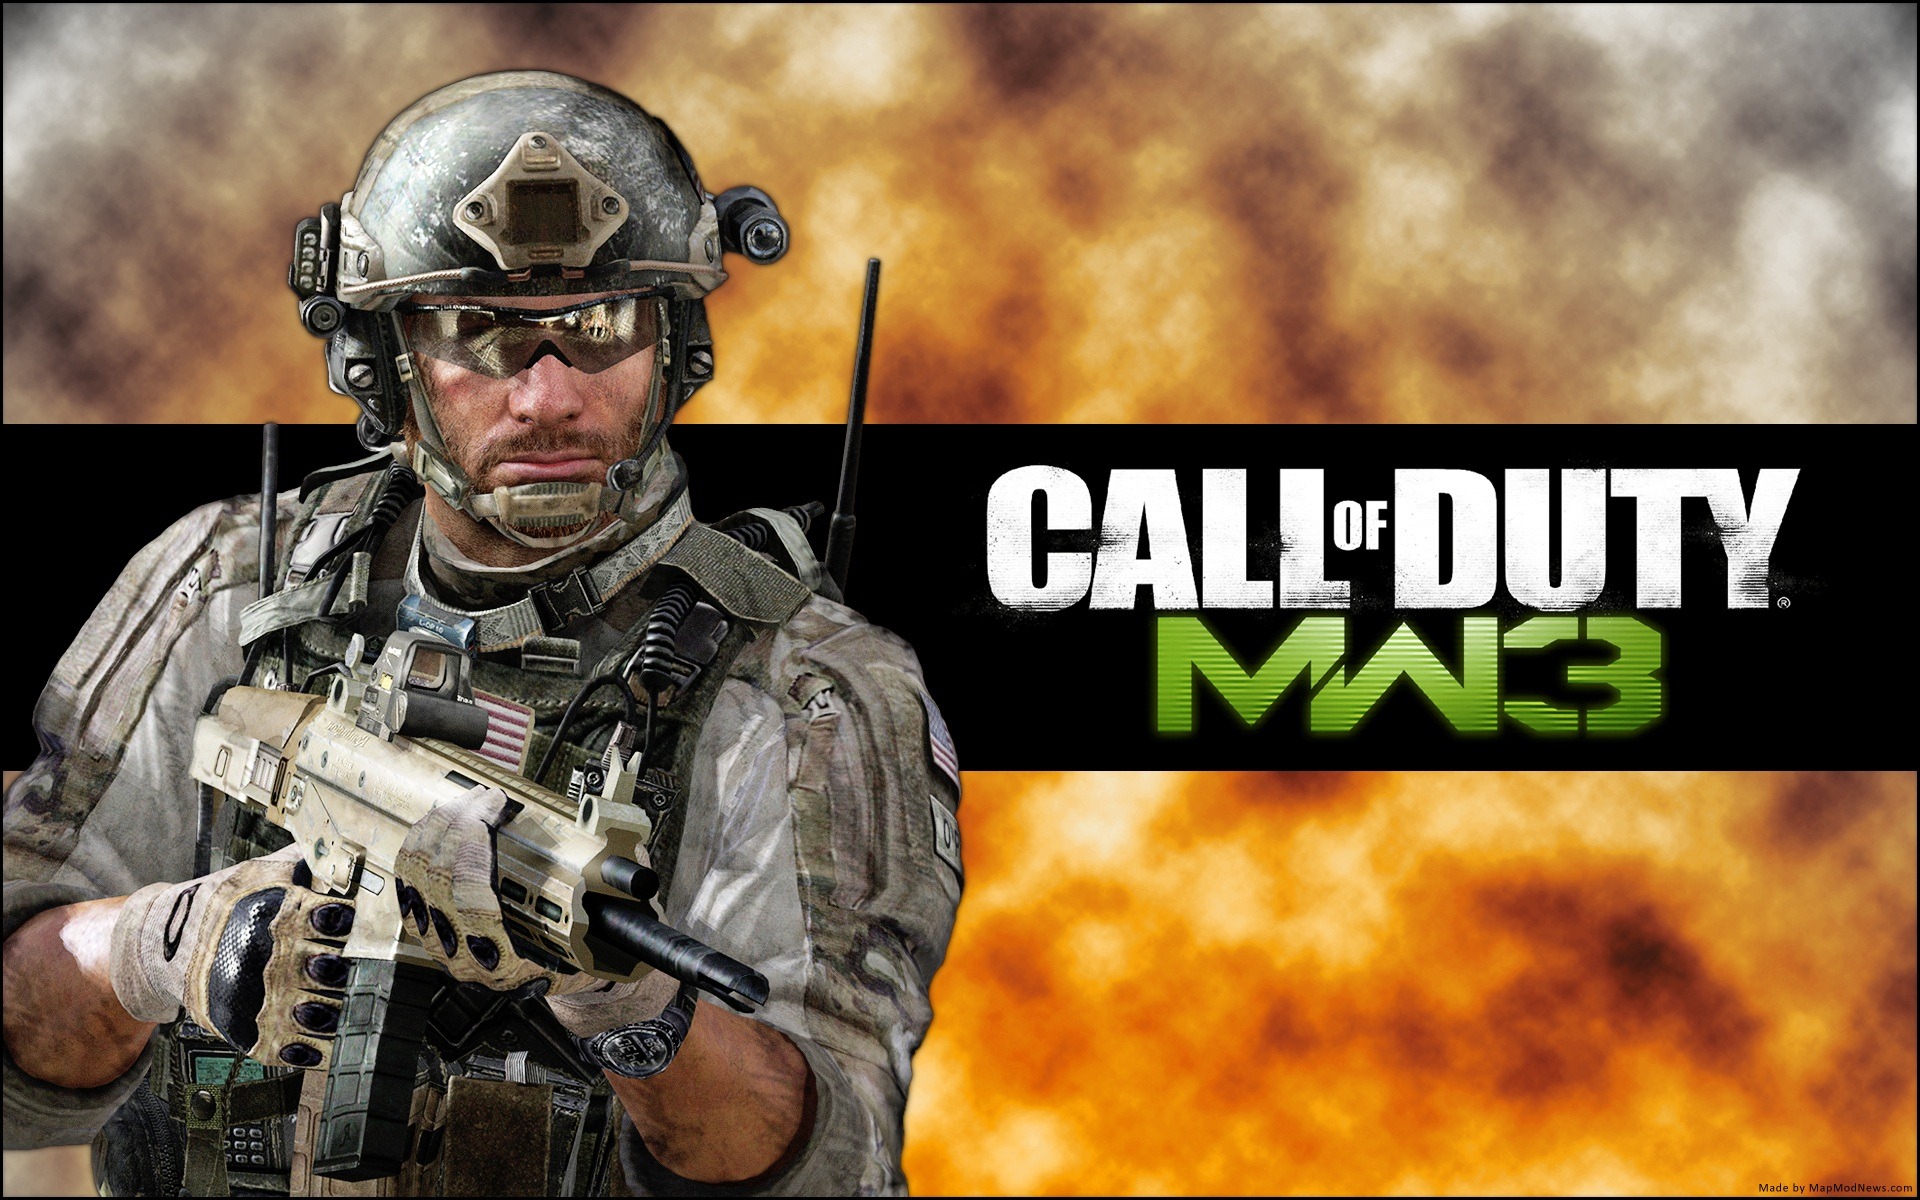 Call of Duty: MW3 HD wallpapers #14 - 1920x1200